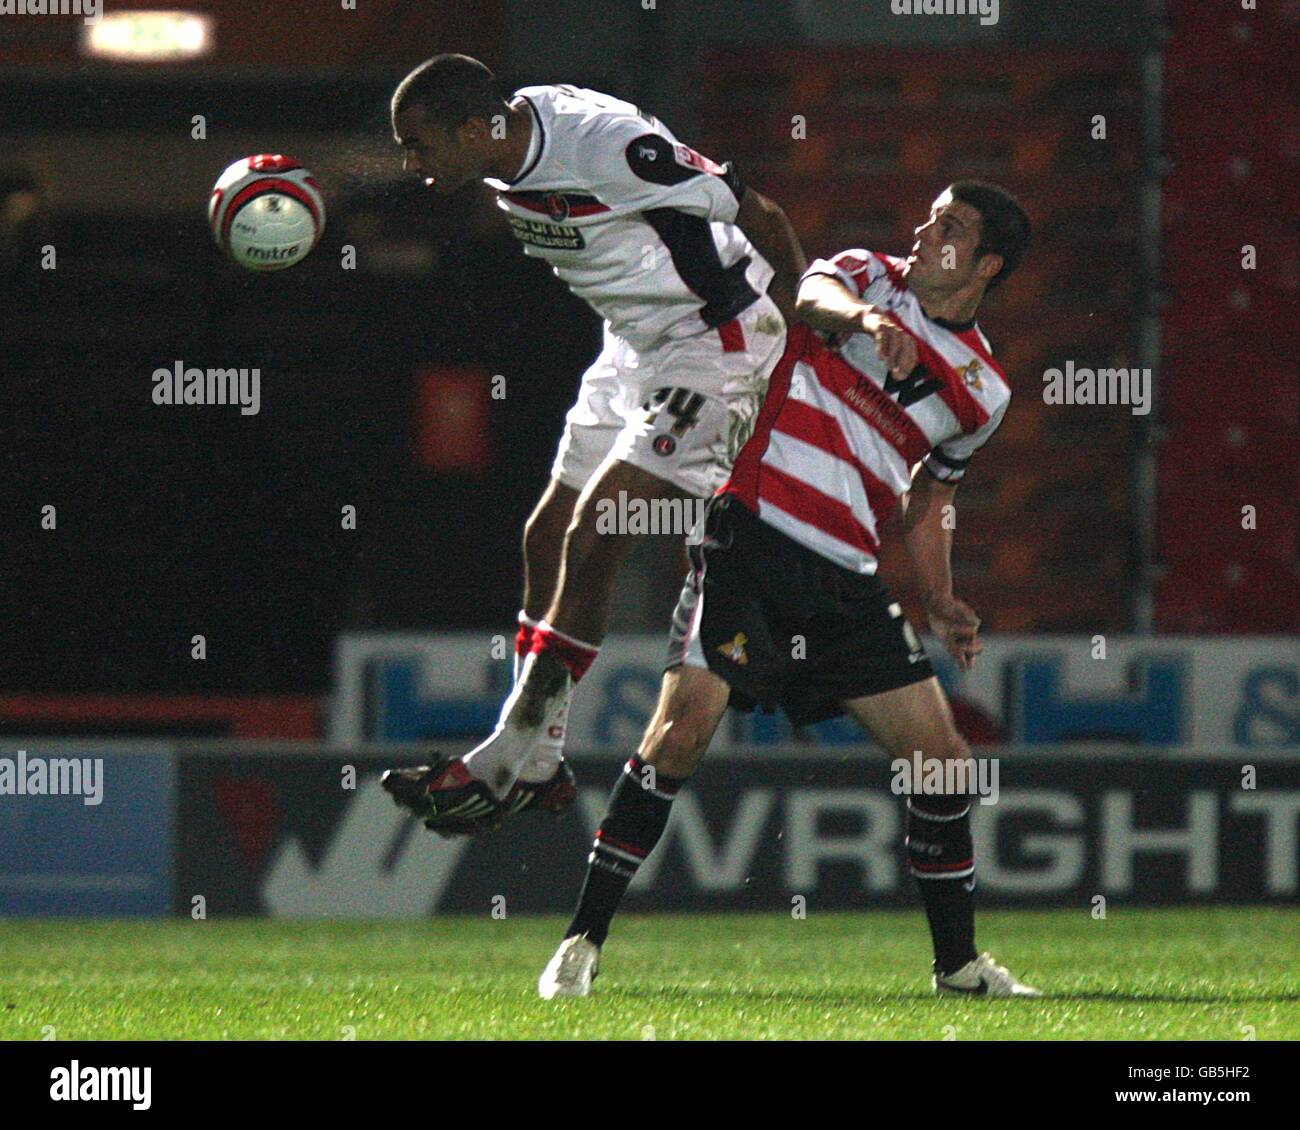 Soccer - Coca-Cola Football League Championship - Doncaster Rovers v Charlton Athletic - Keepmoat Stadium. Charlton Athletic's Hameur Bouazza (l) rises high above Doncaster Rovers' Lewis Guy in a battle for the ball Stock Photo